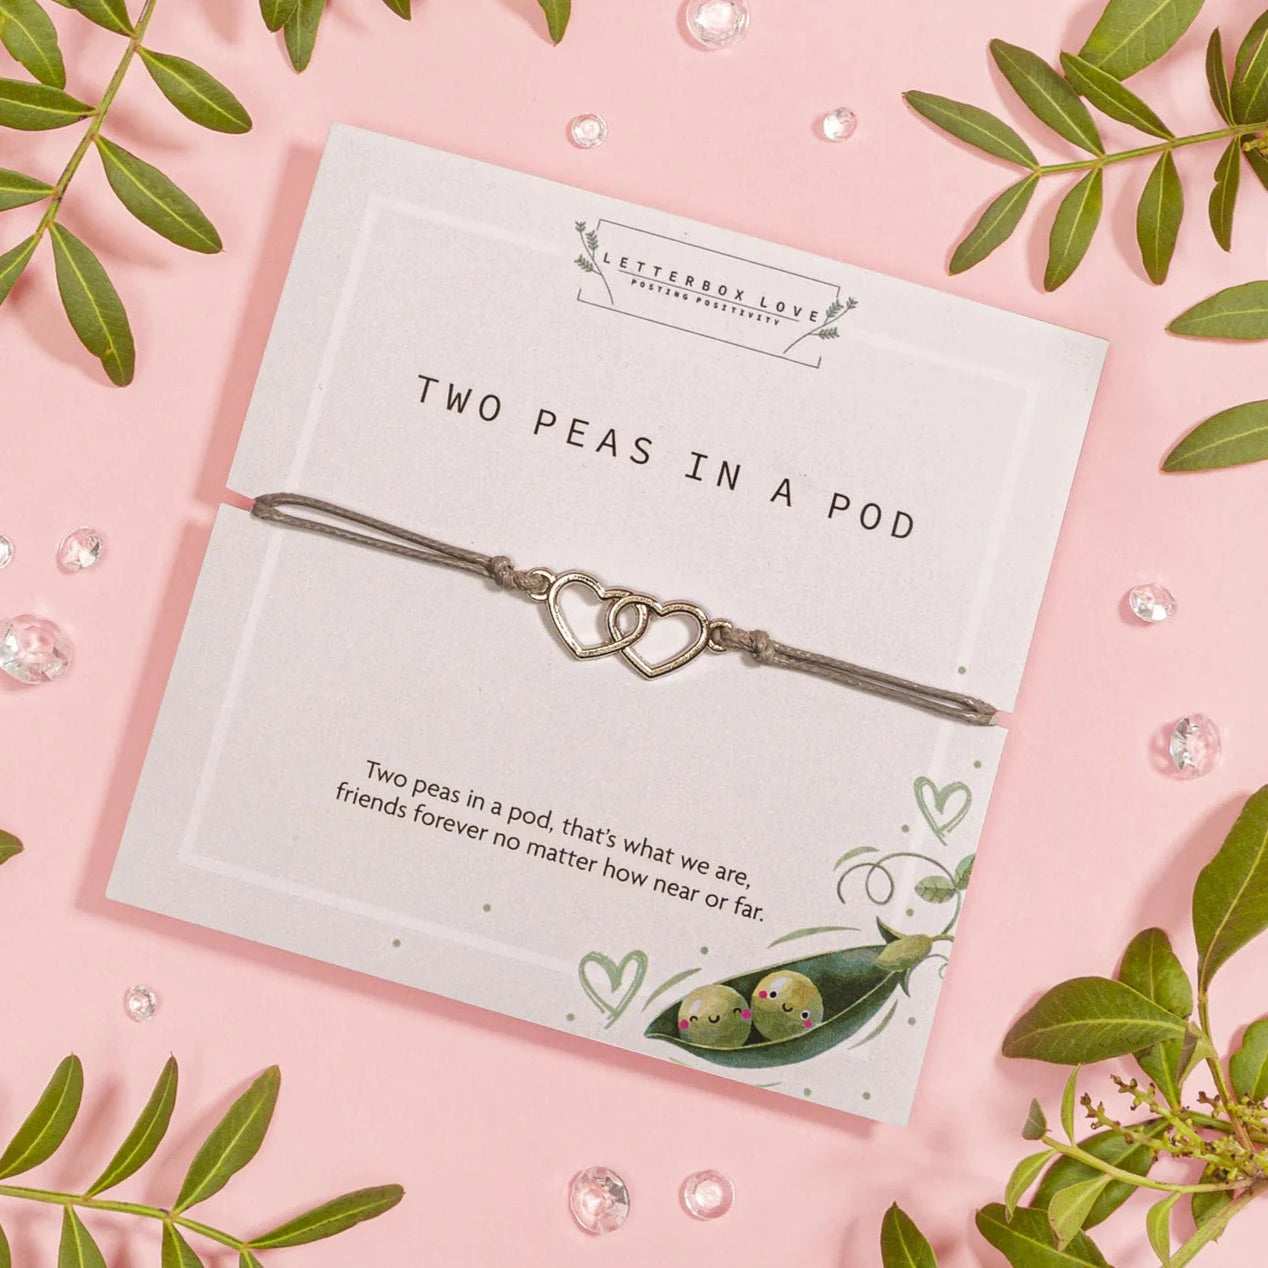 "Two Peas in a Pod" Friendship Bracelet and Card Set